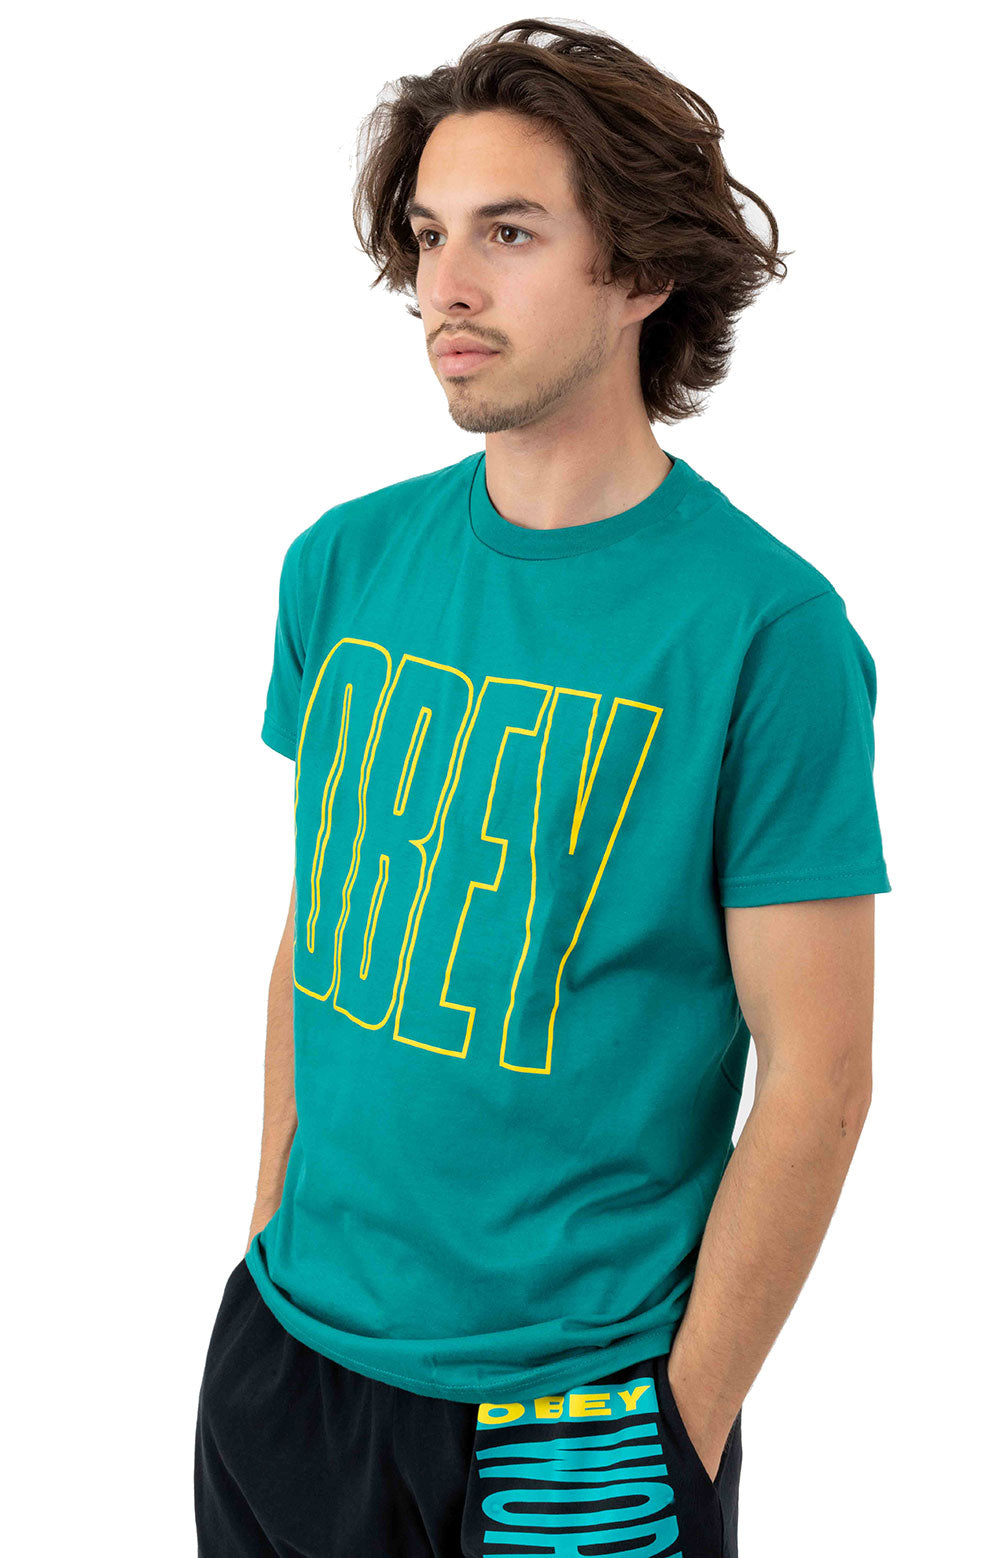 Obey Worldwide Line T-Shirt - Teal